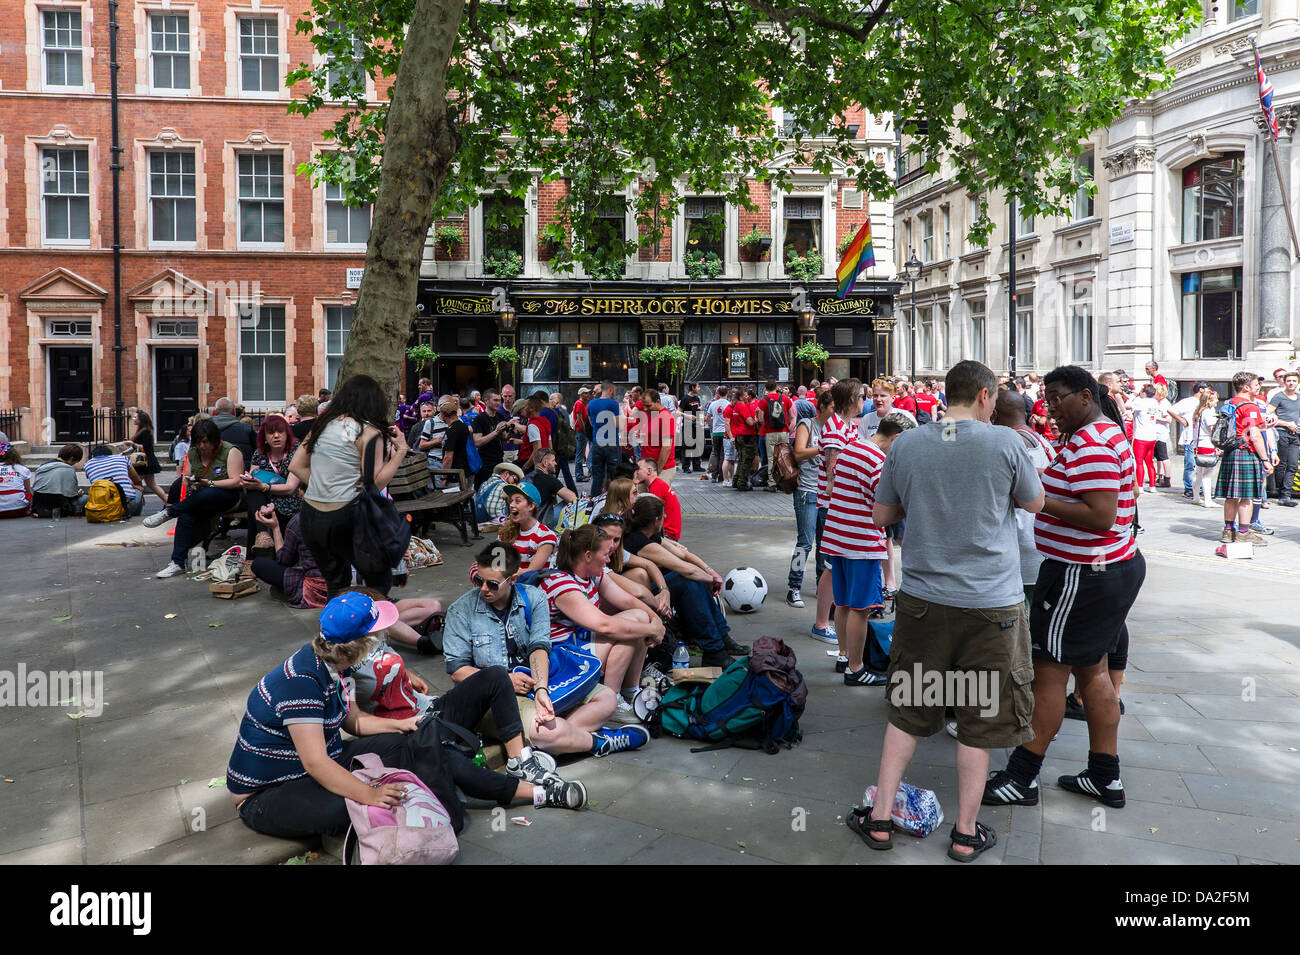 A large crowd of people outside the Sherlock Holmes pub in London Stock Photo